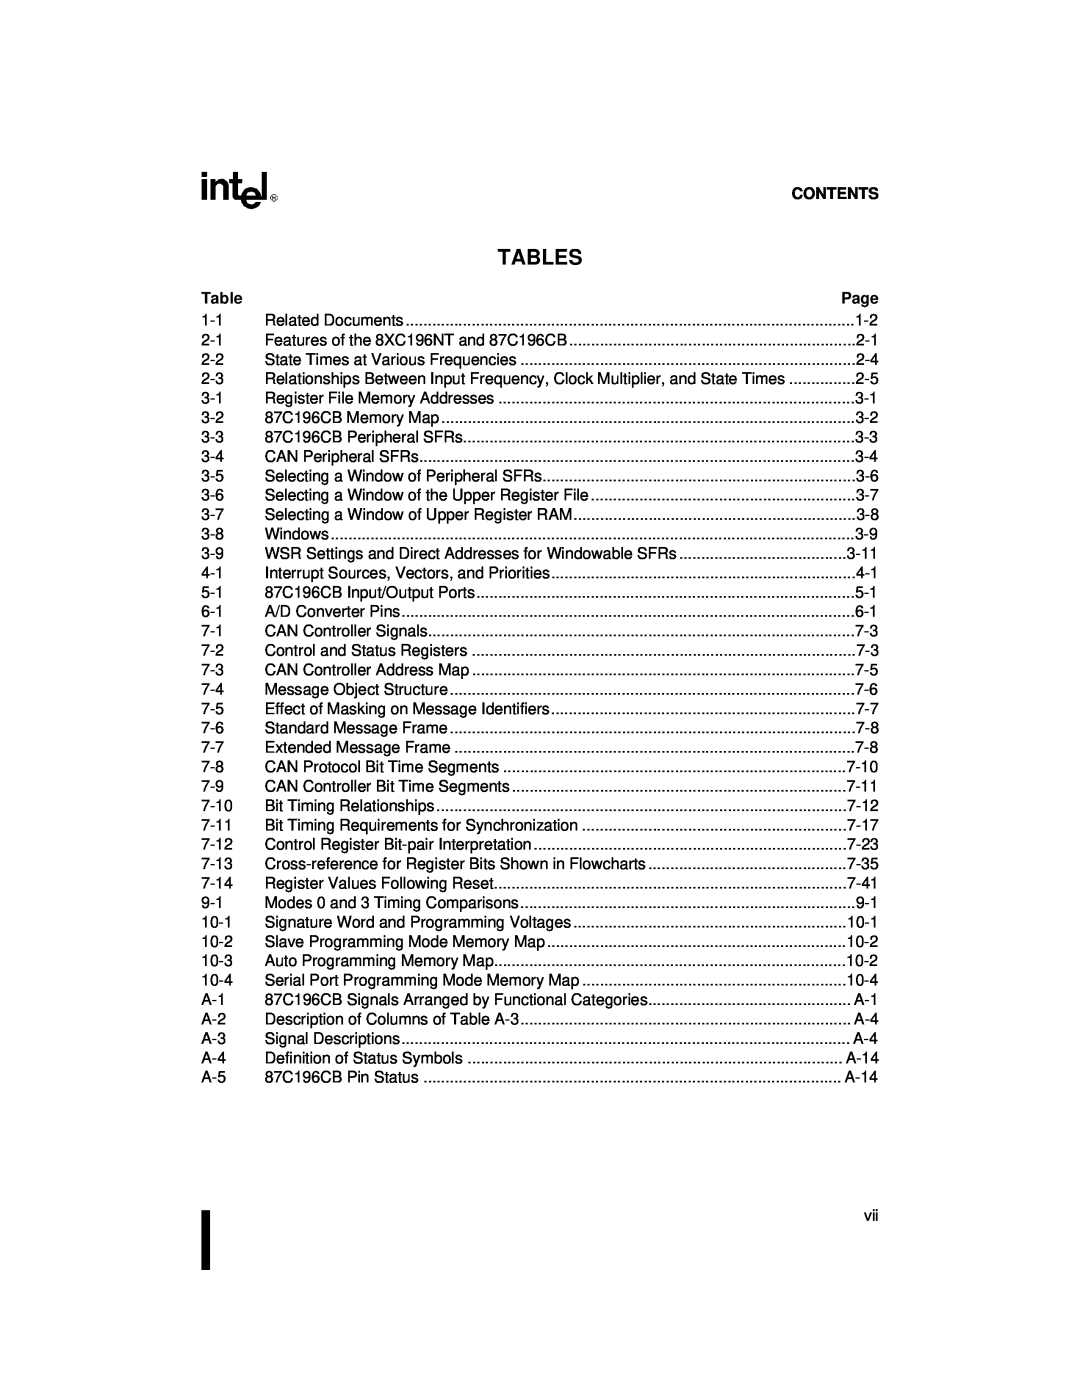 Intel 87C196CB, 8XC196NT user manual Tables, Contents, Page 